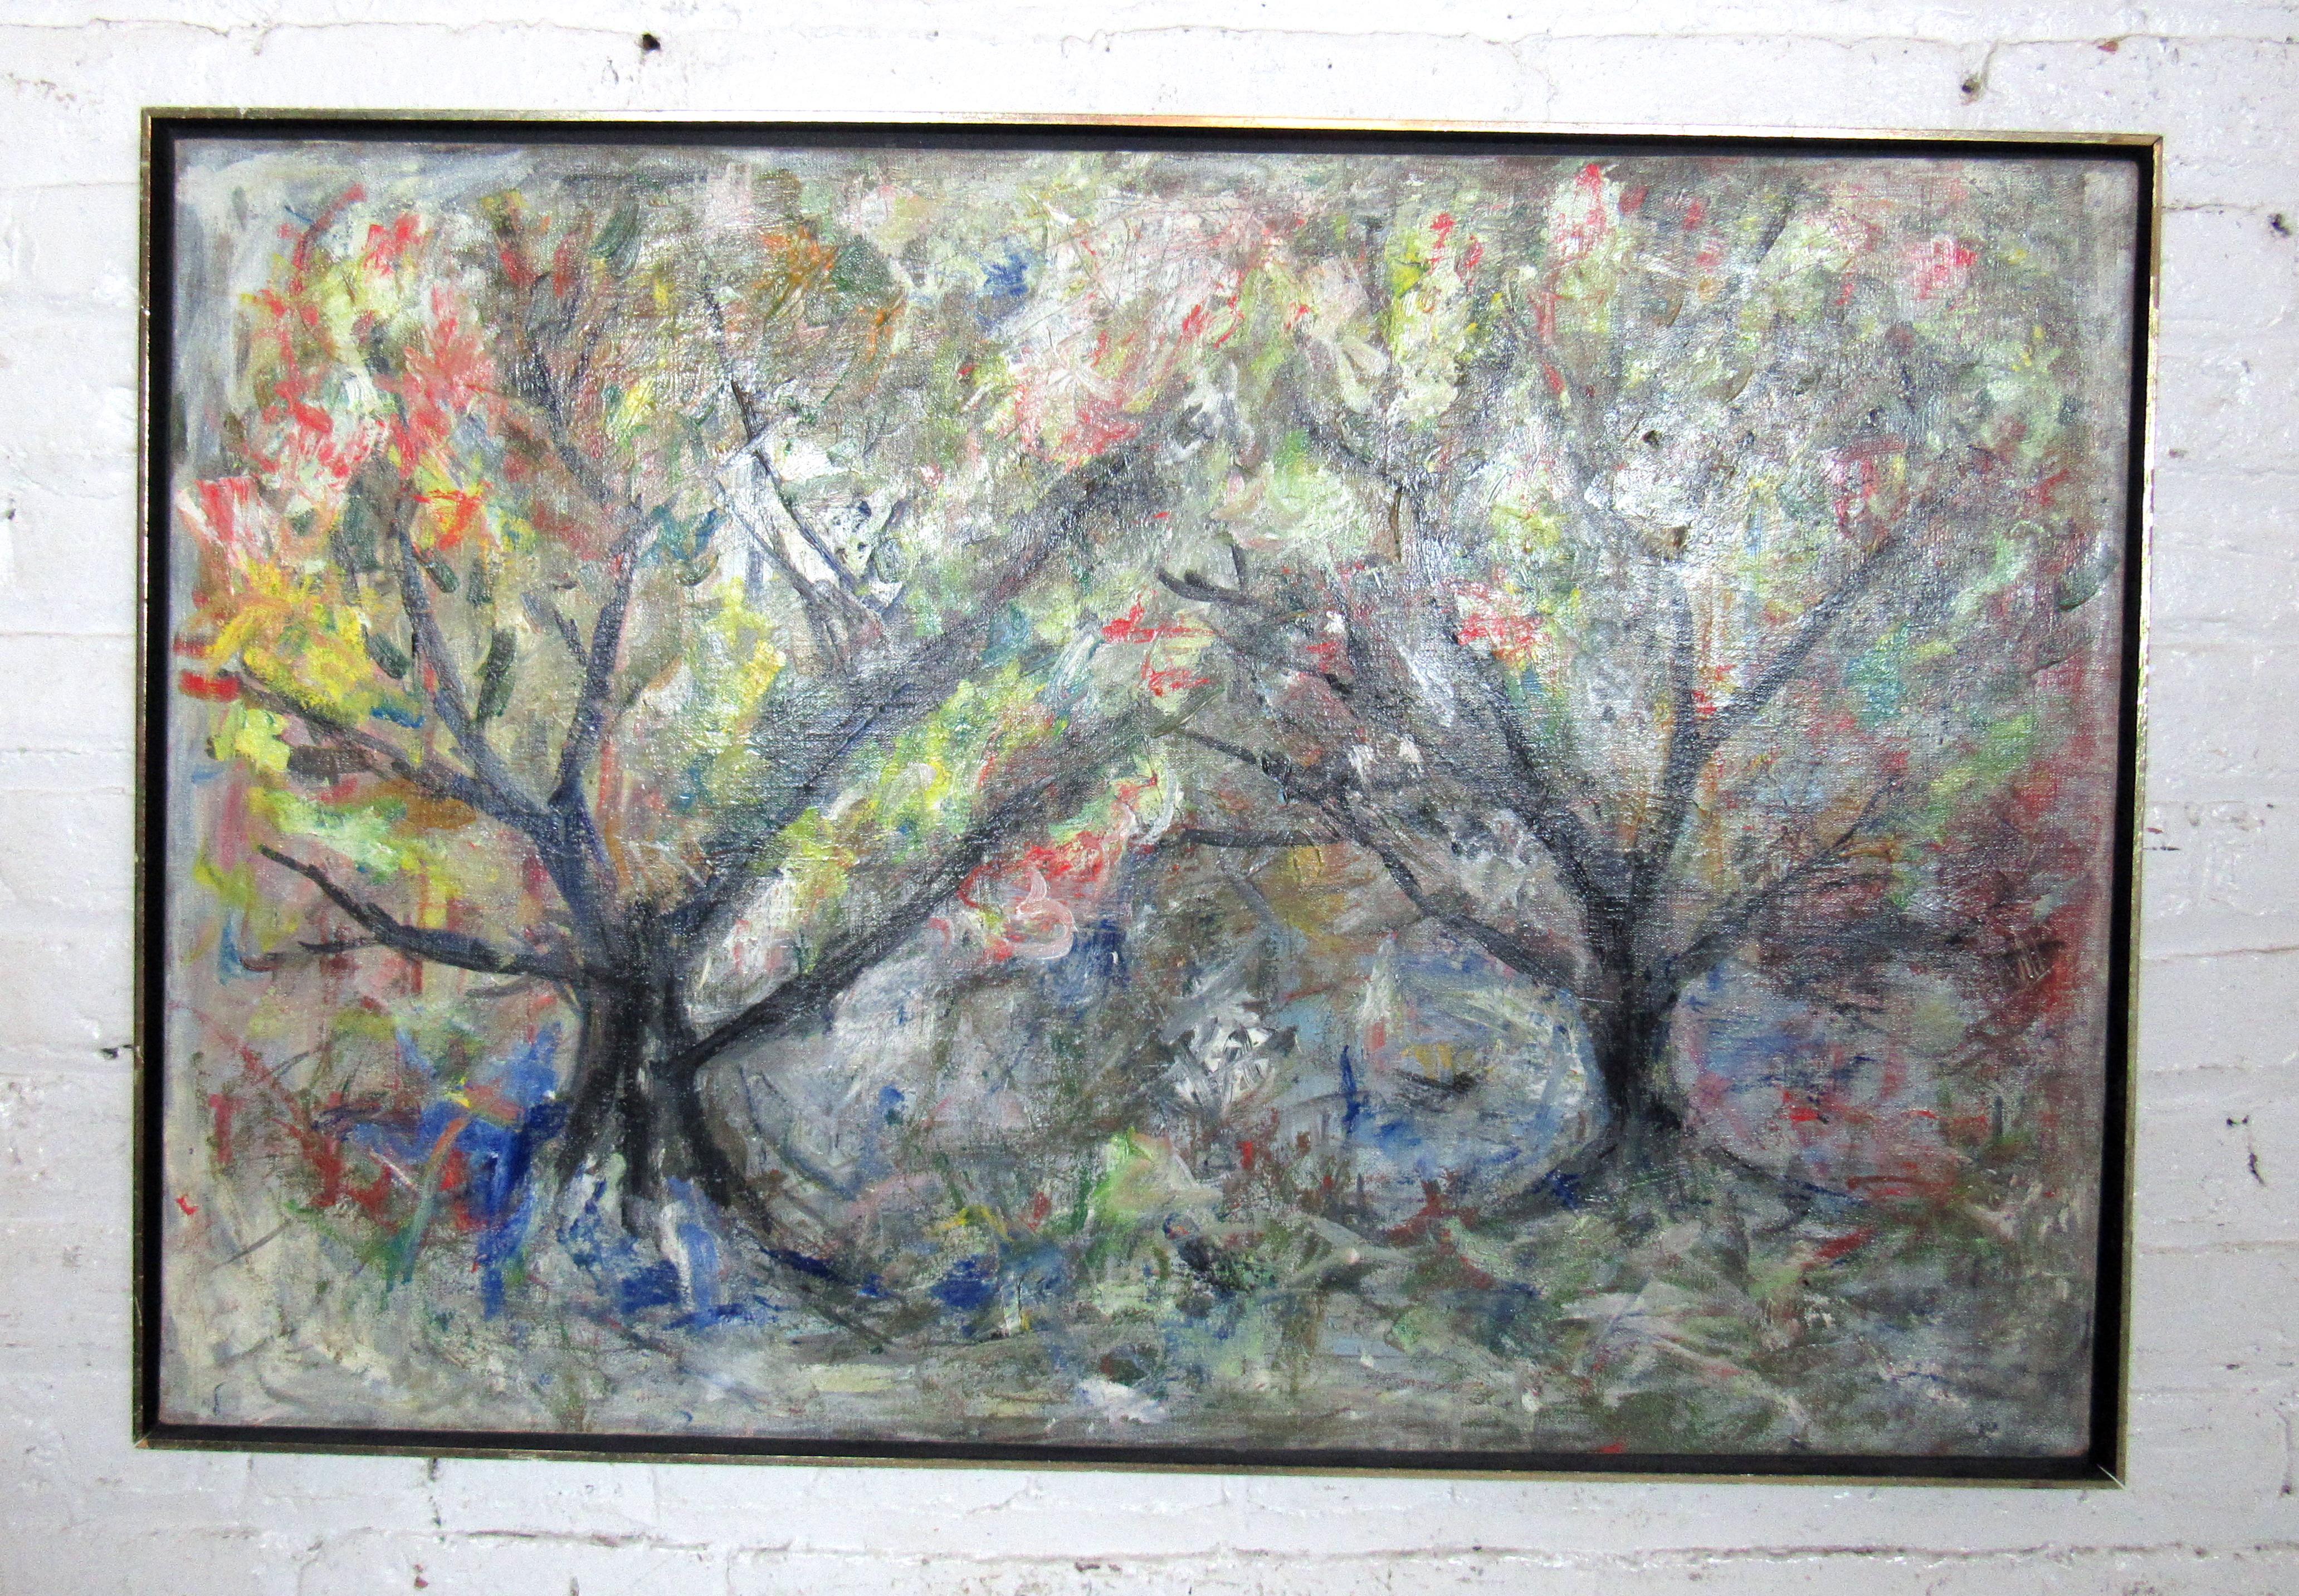 Mid-Century Modern oil painting of trees signed by artist Wegener.

Please confirm the item location (NY or NJ).